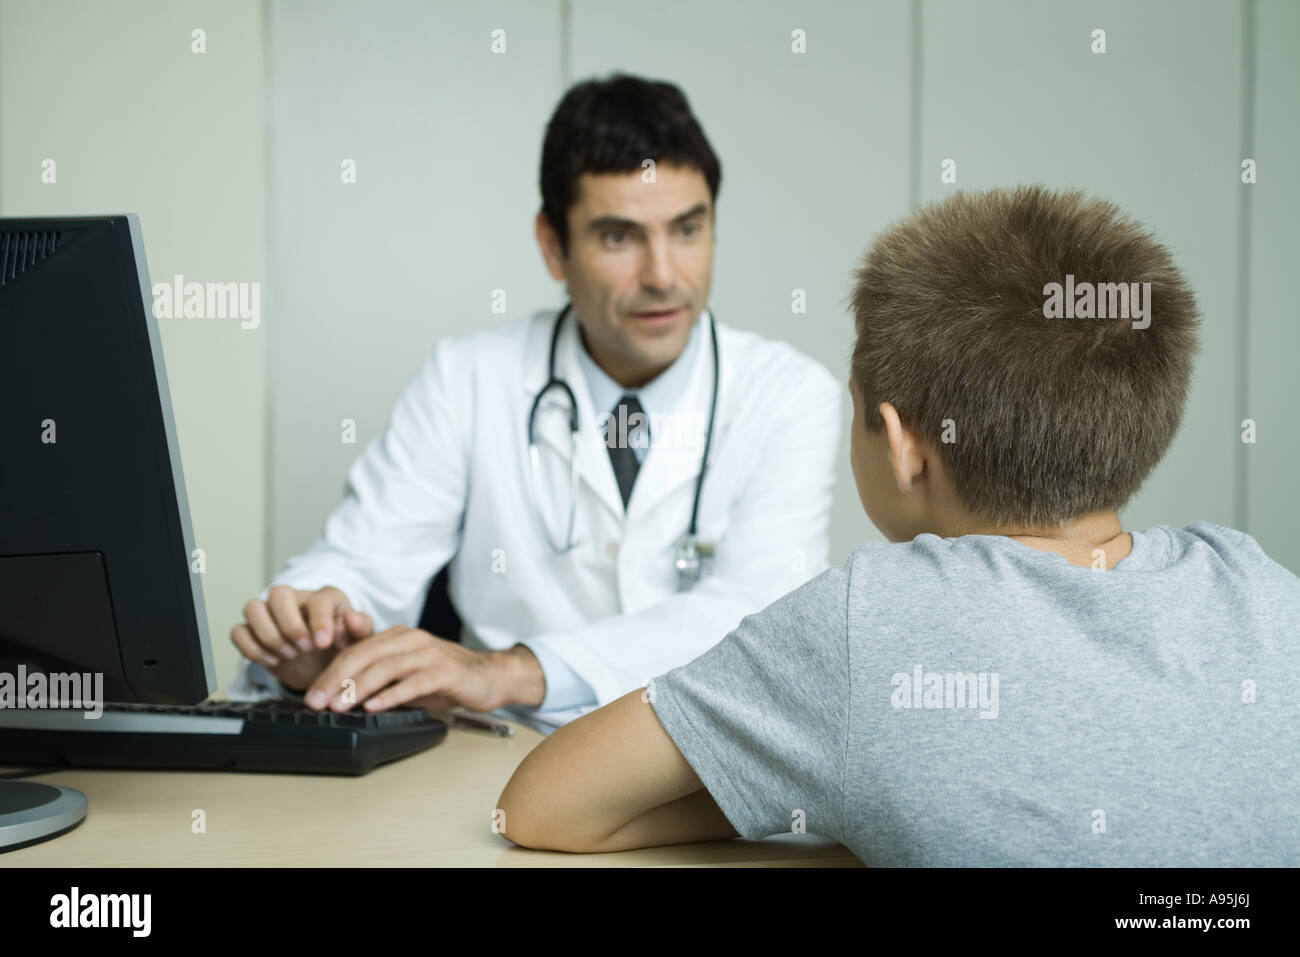 Doctor sitting across from boy, using computer Stock Photo